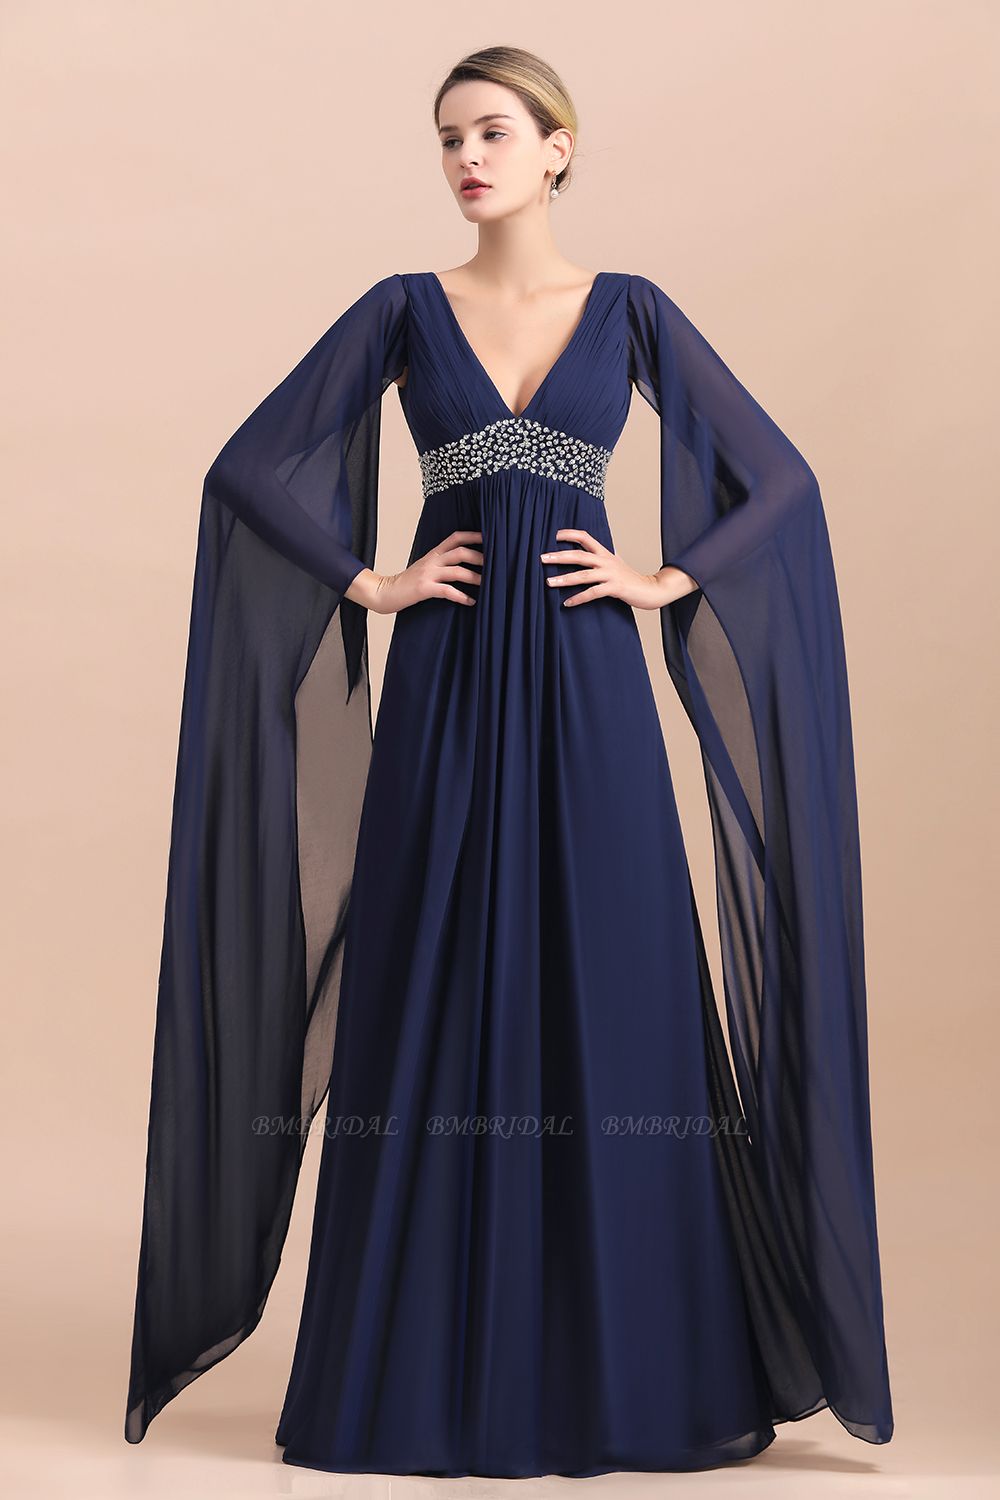 BMbridal Navy Long Sleeve Chiffon Mother Of the Bride Dress With Ruffles Online